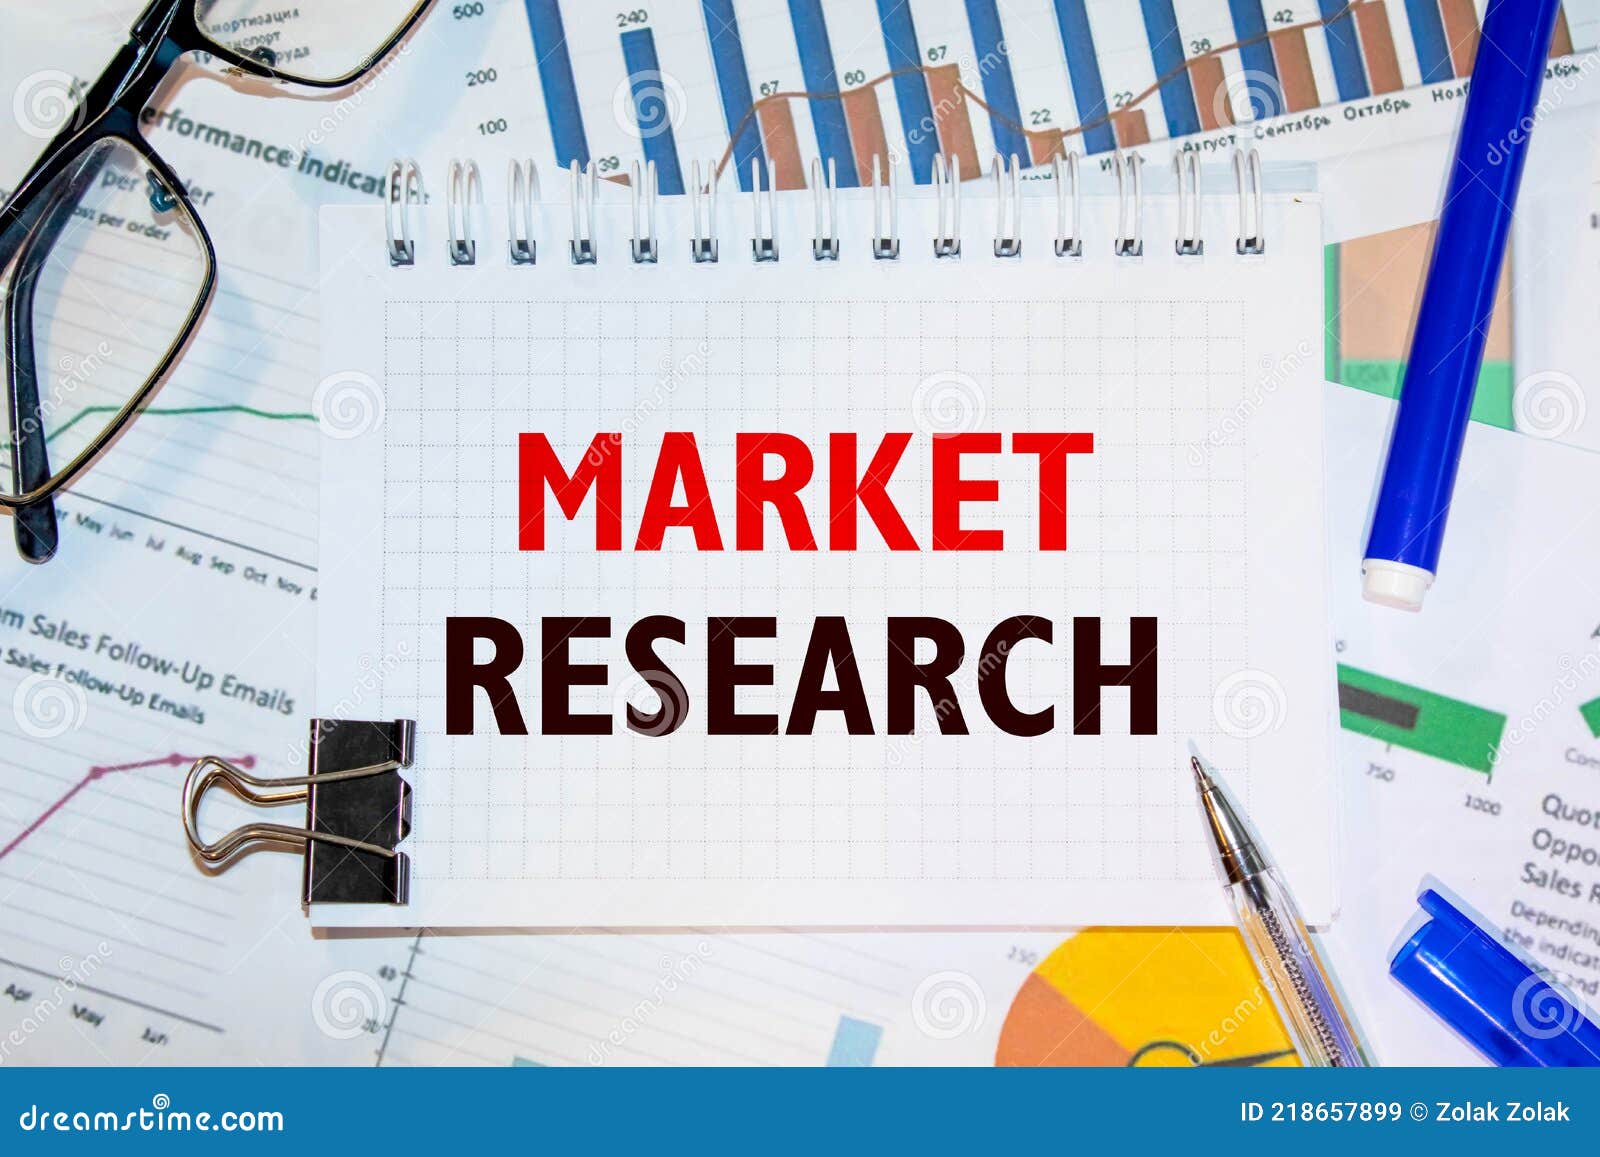 market research to launch a new product